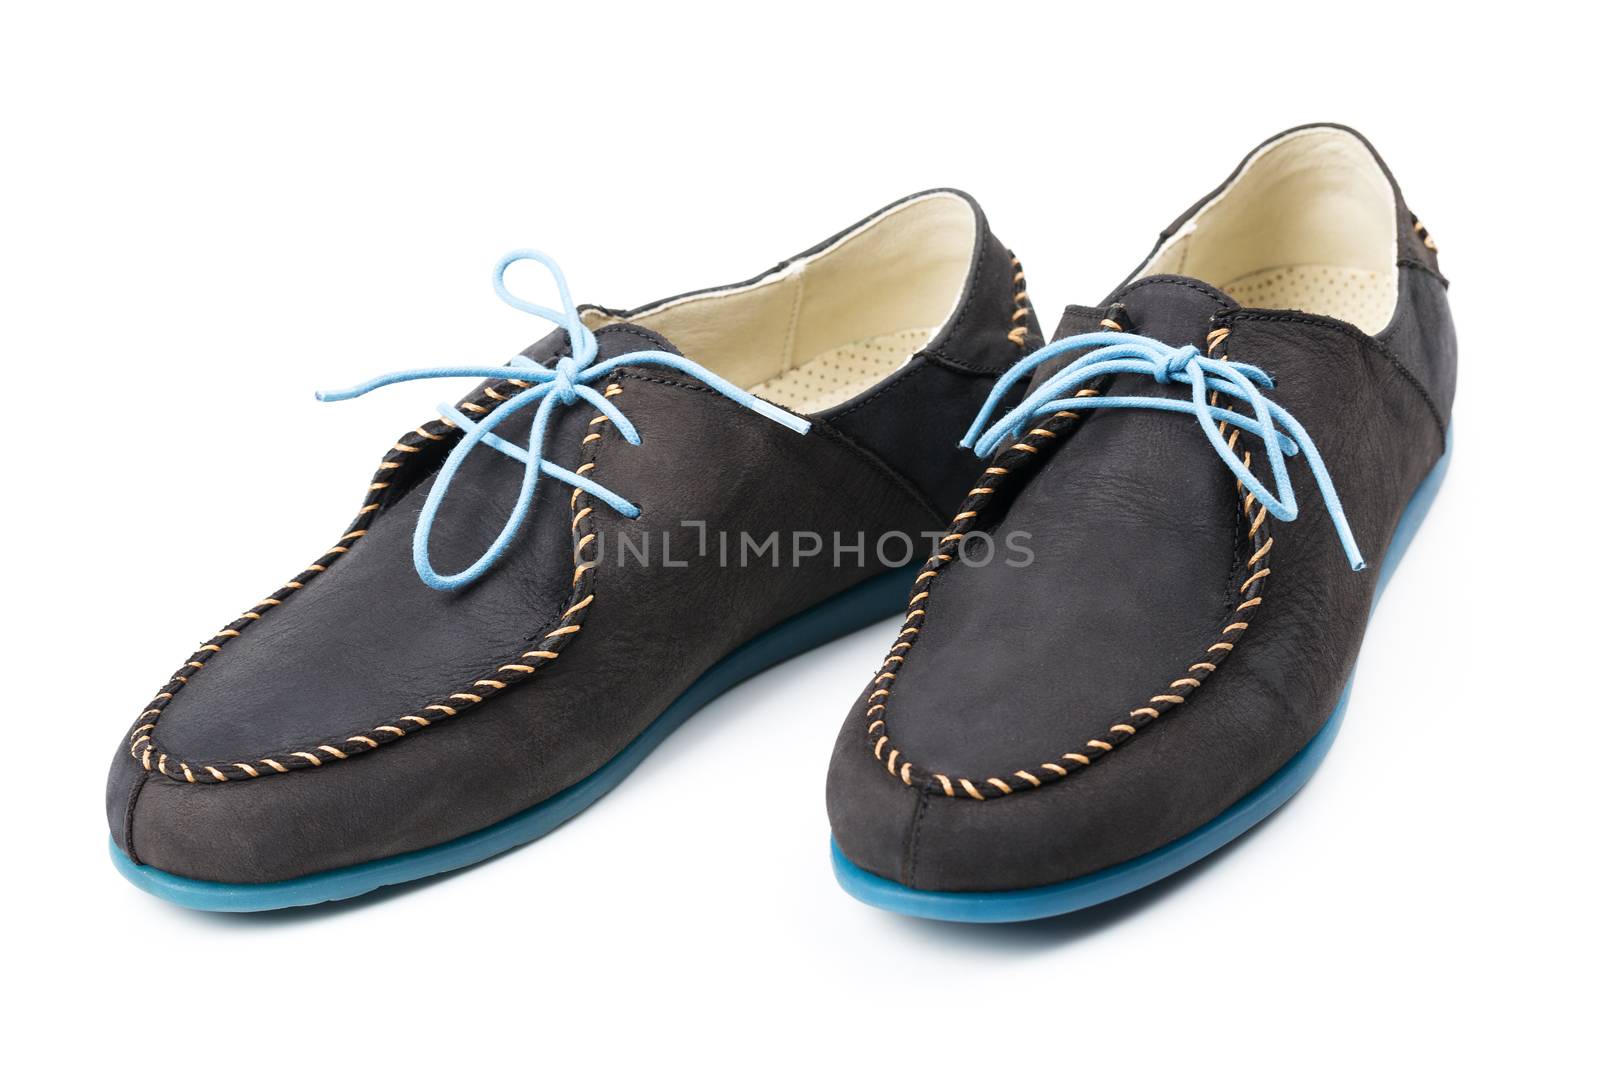 Black men's leather loafers with blue soles and laces on a white background